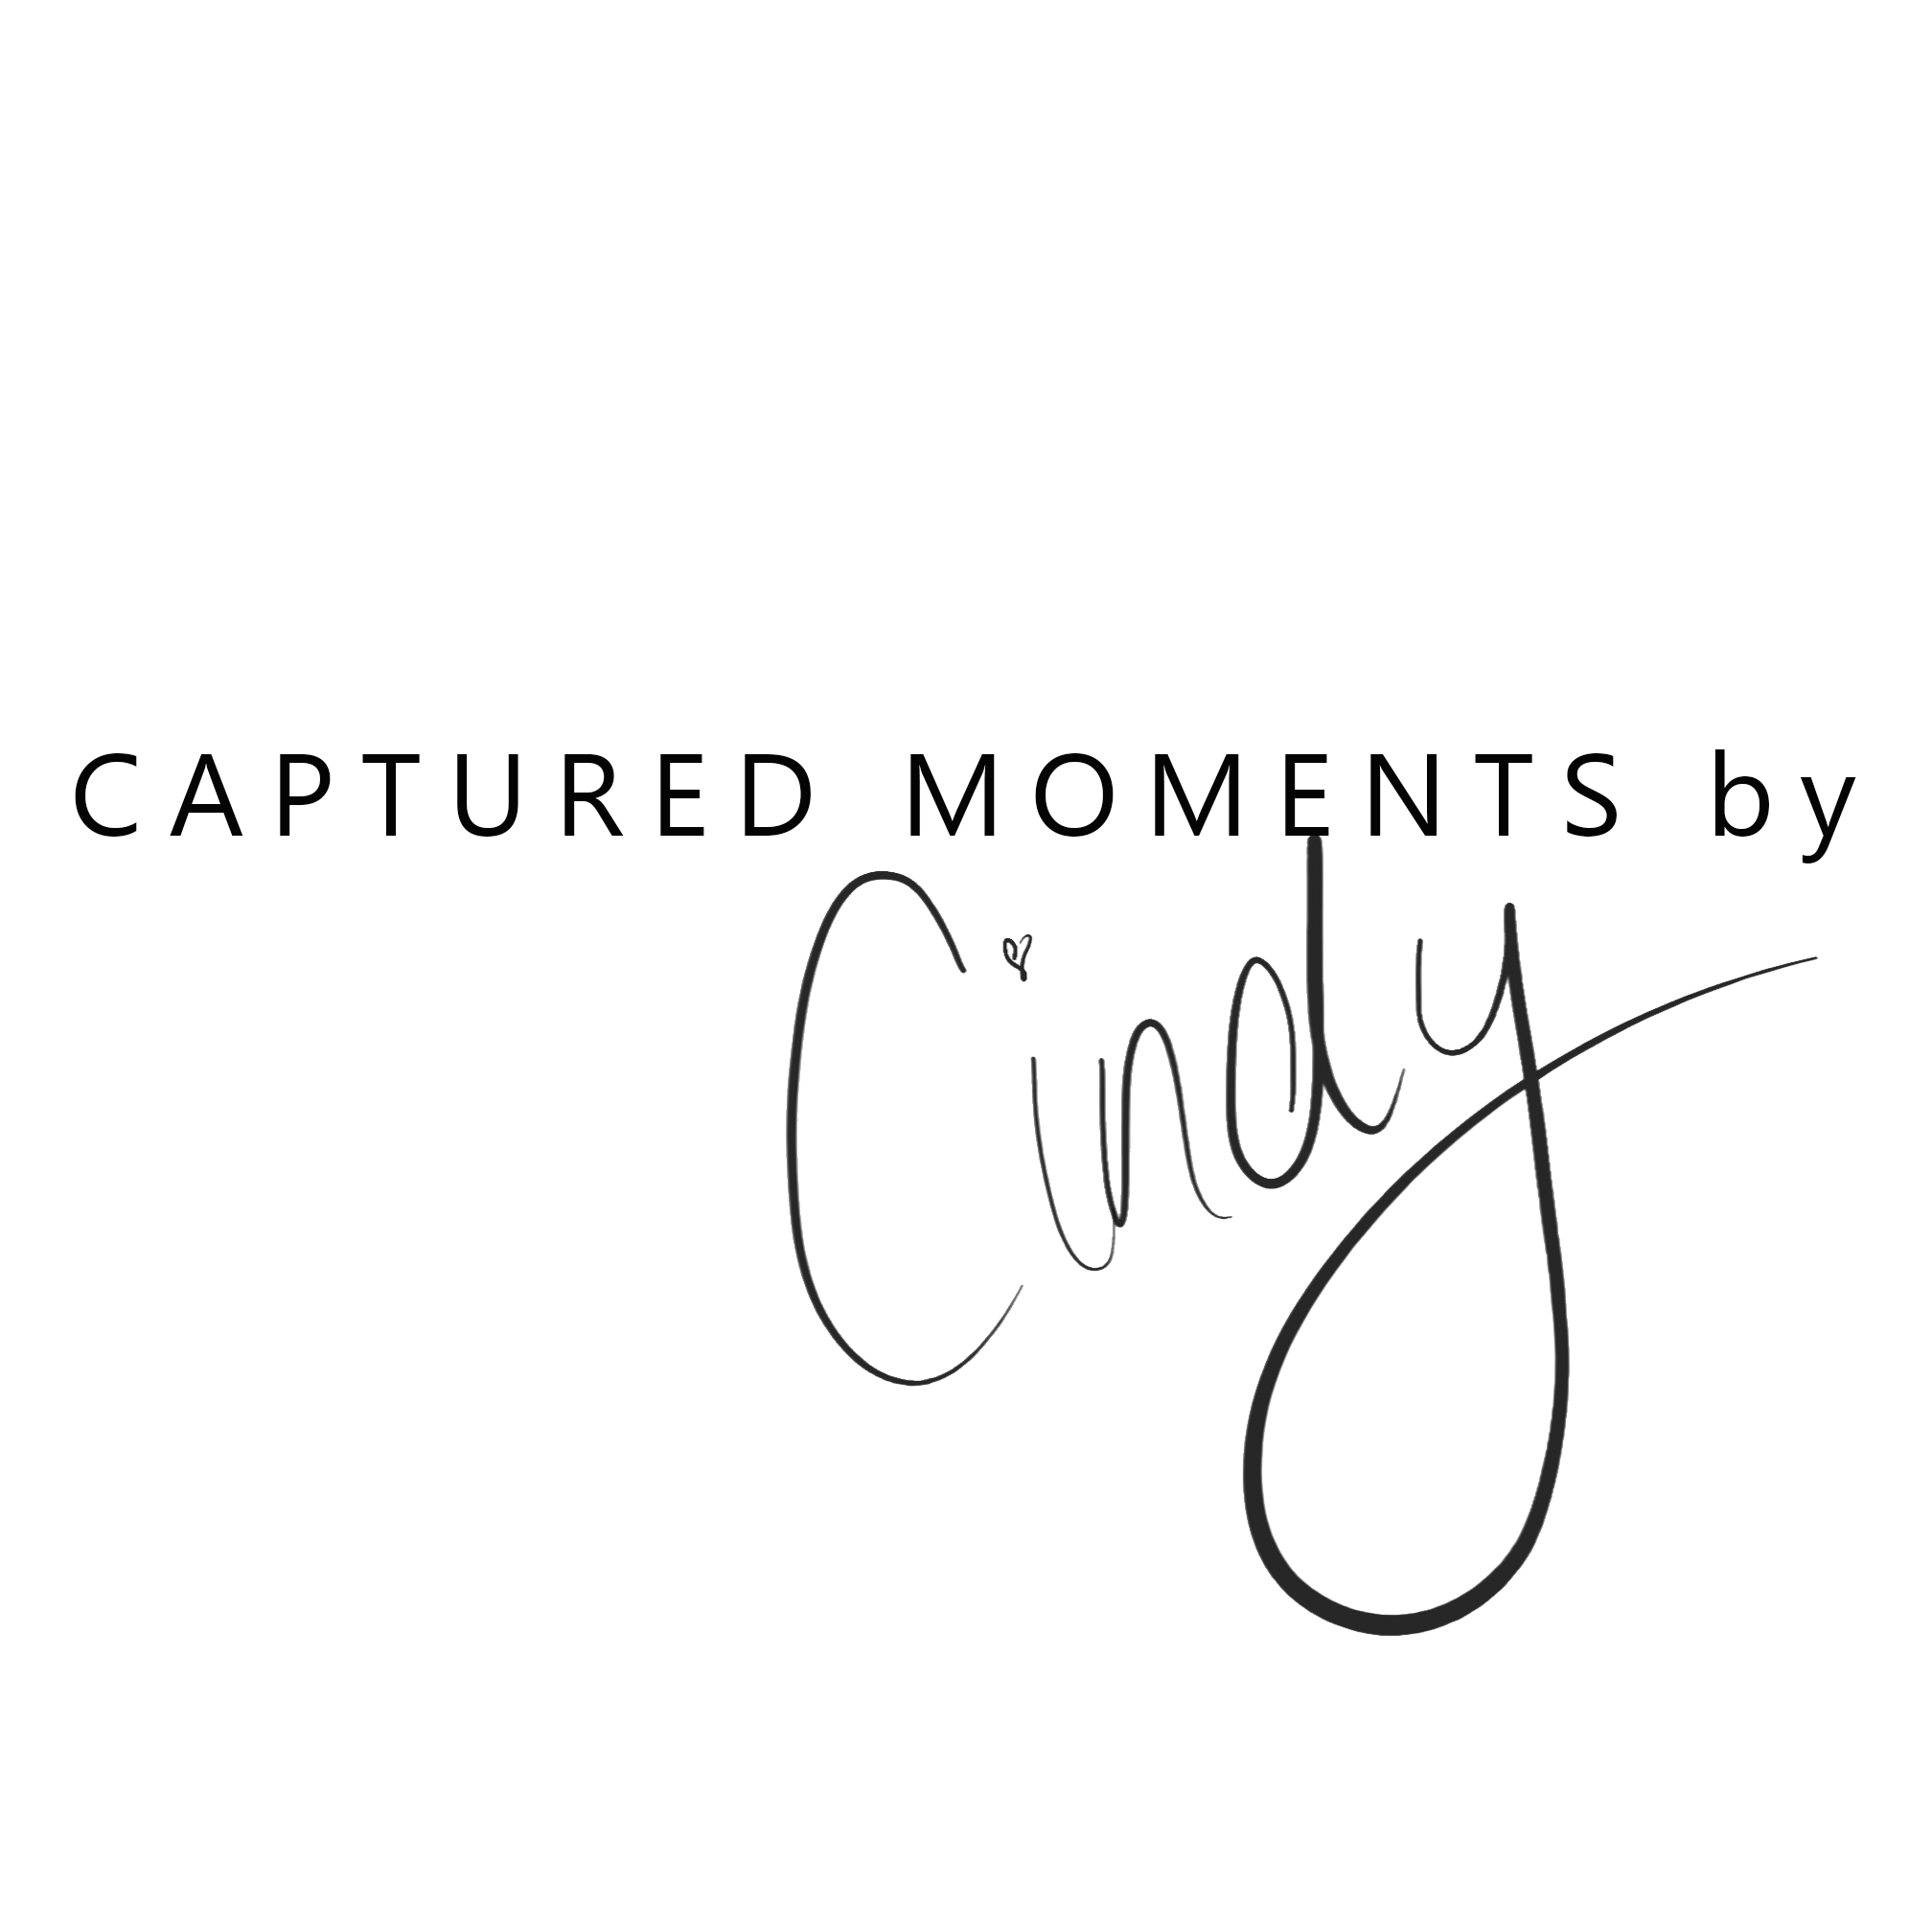 Captured Moments by Cindy